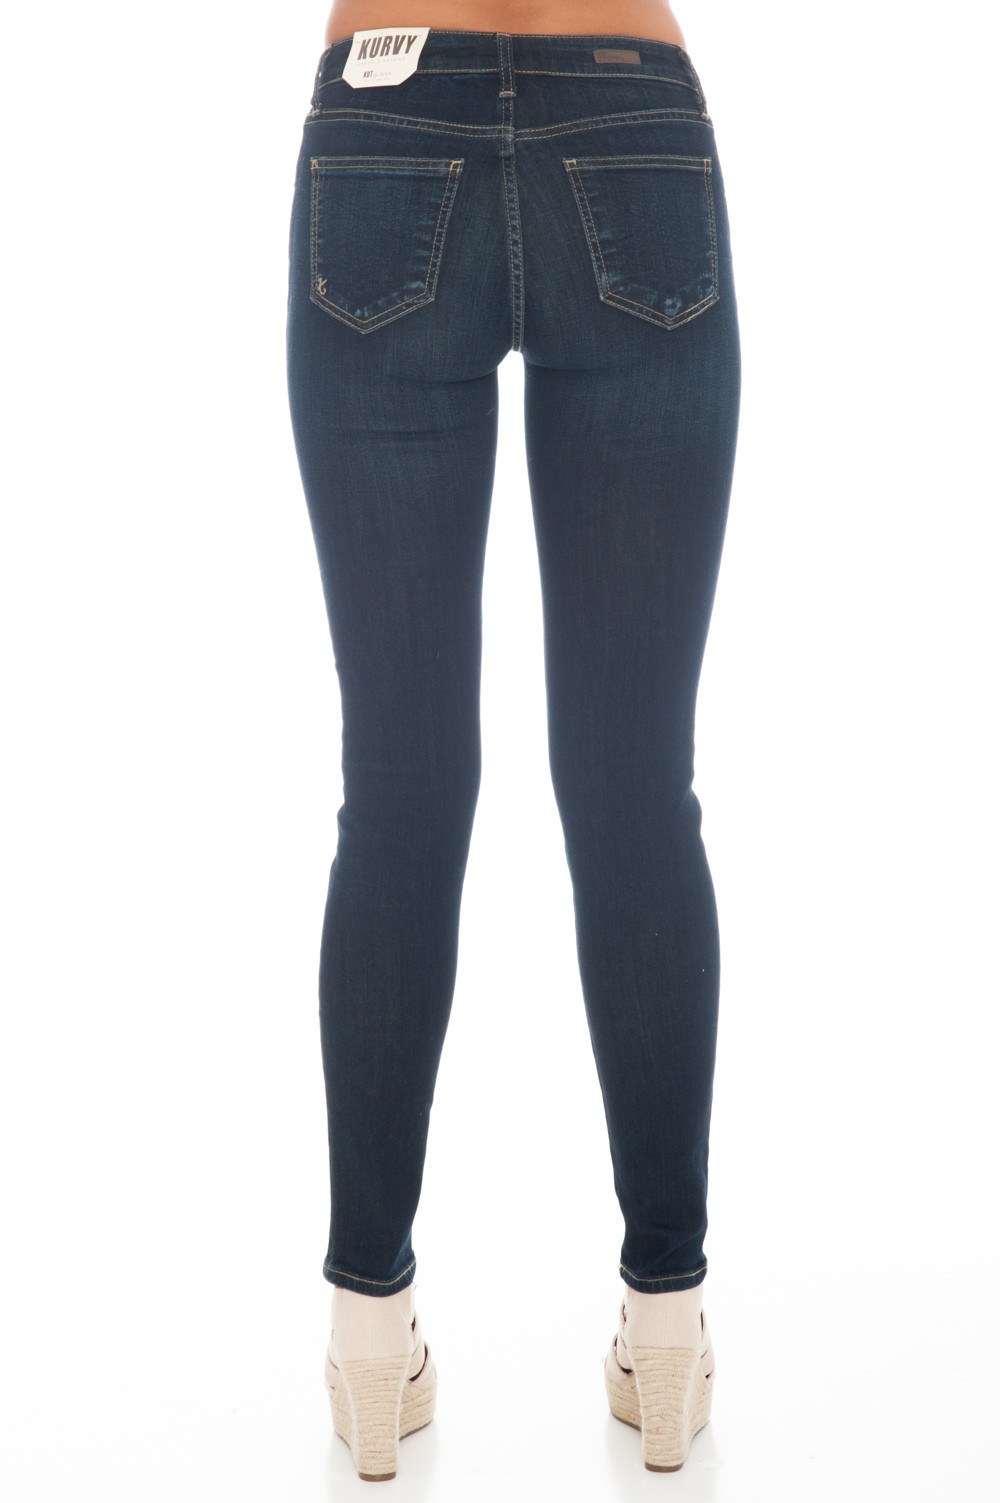 Jean - Diana Limitless Kurvy Skinny by Kut From the Kloth - 3